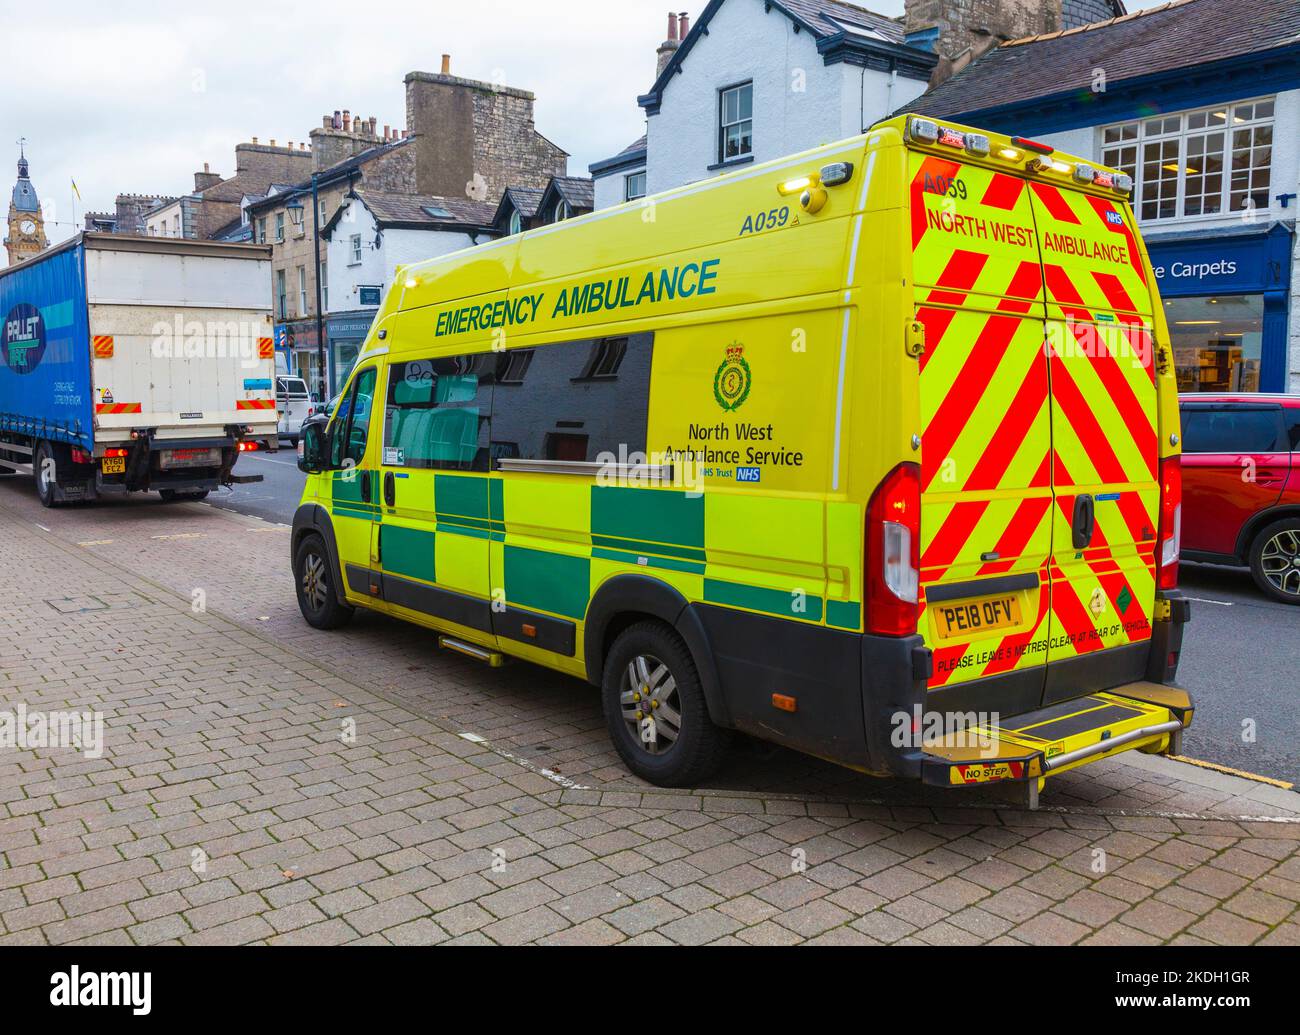 An emergency Ambulance vehicle parked up on the main street in Kendal, Cumbria, England, UK Stock Photo